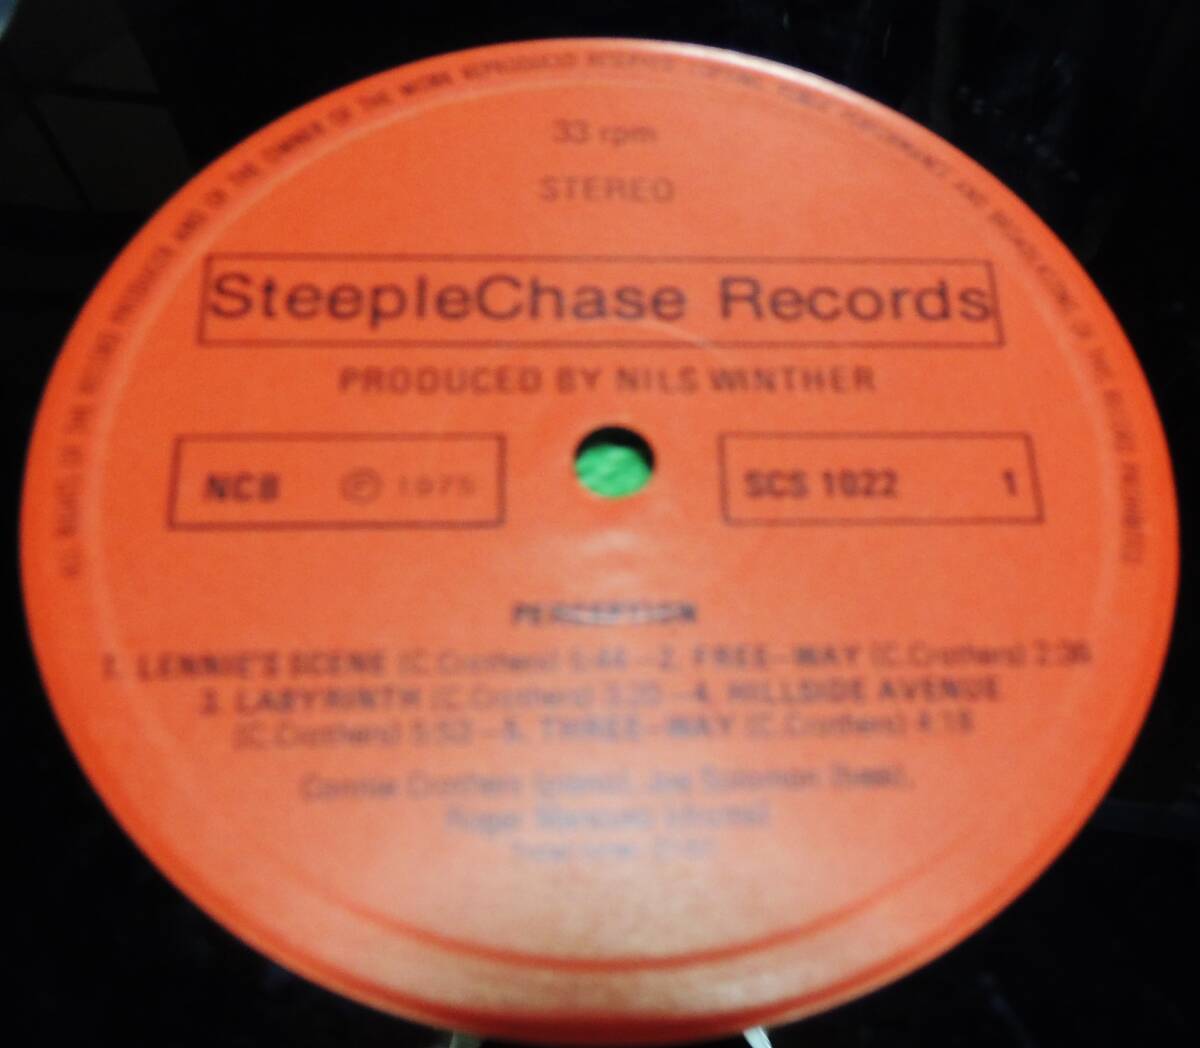 ♪　CONNIE CROTHERS/PERCEPTION　デンマークSleepChase盤LP　NILS WINTHER　コニー・クロザース_画像2